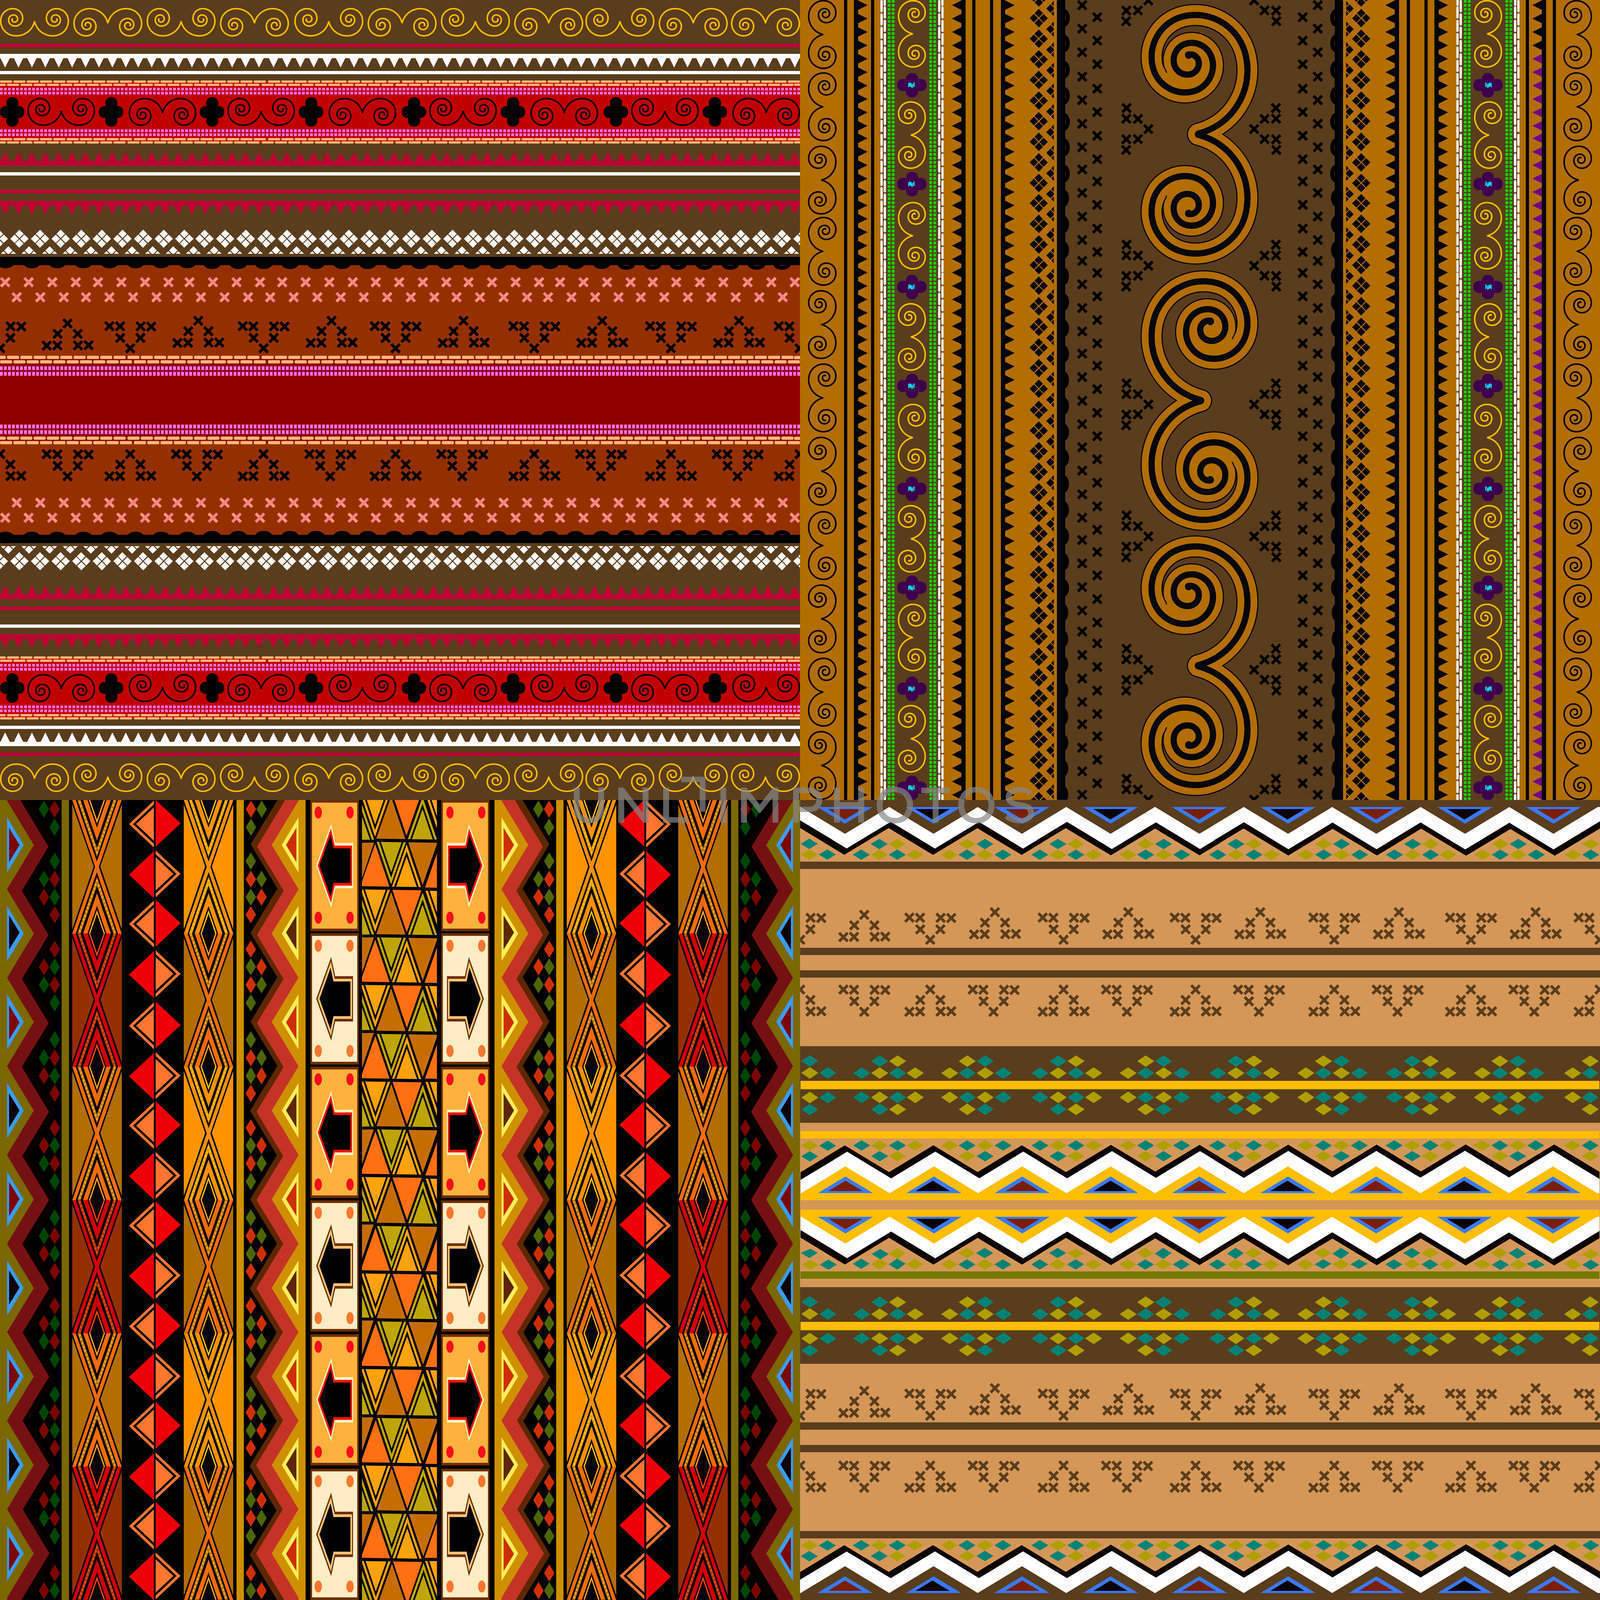 Decorative African patterns by Lirch